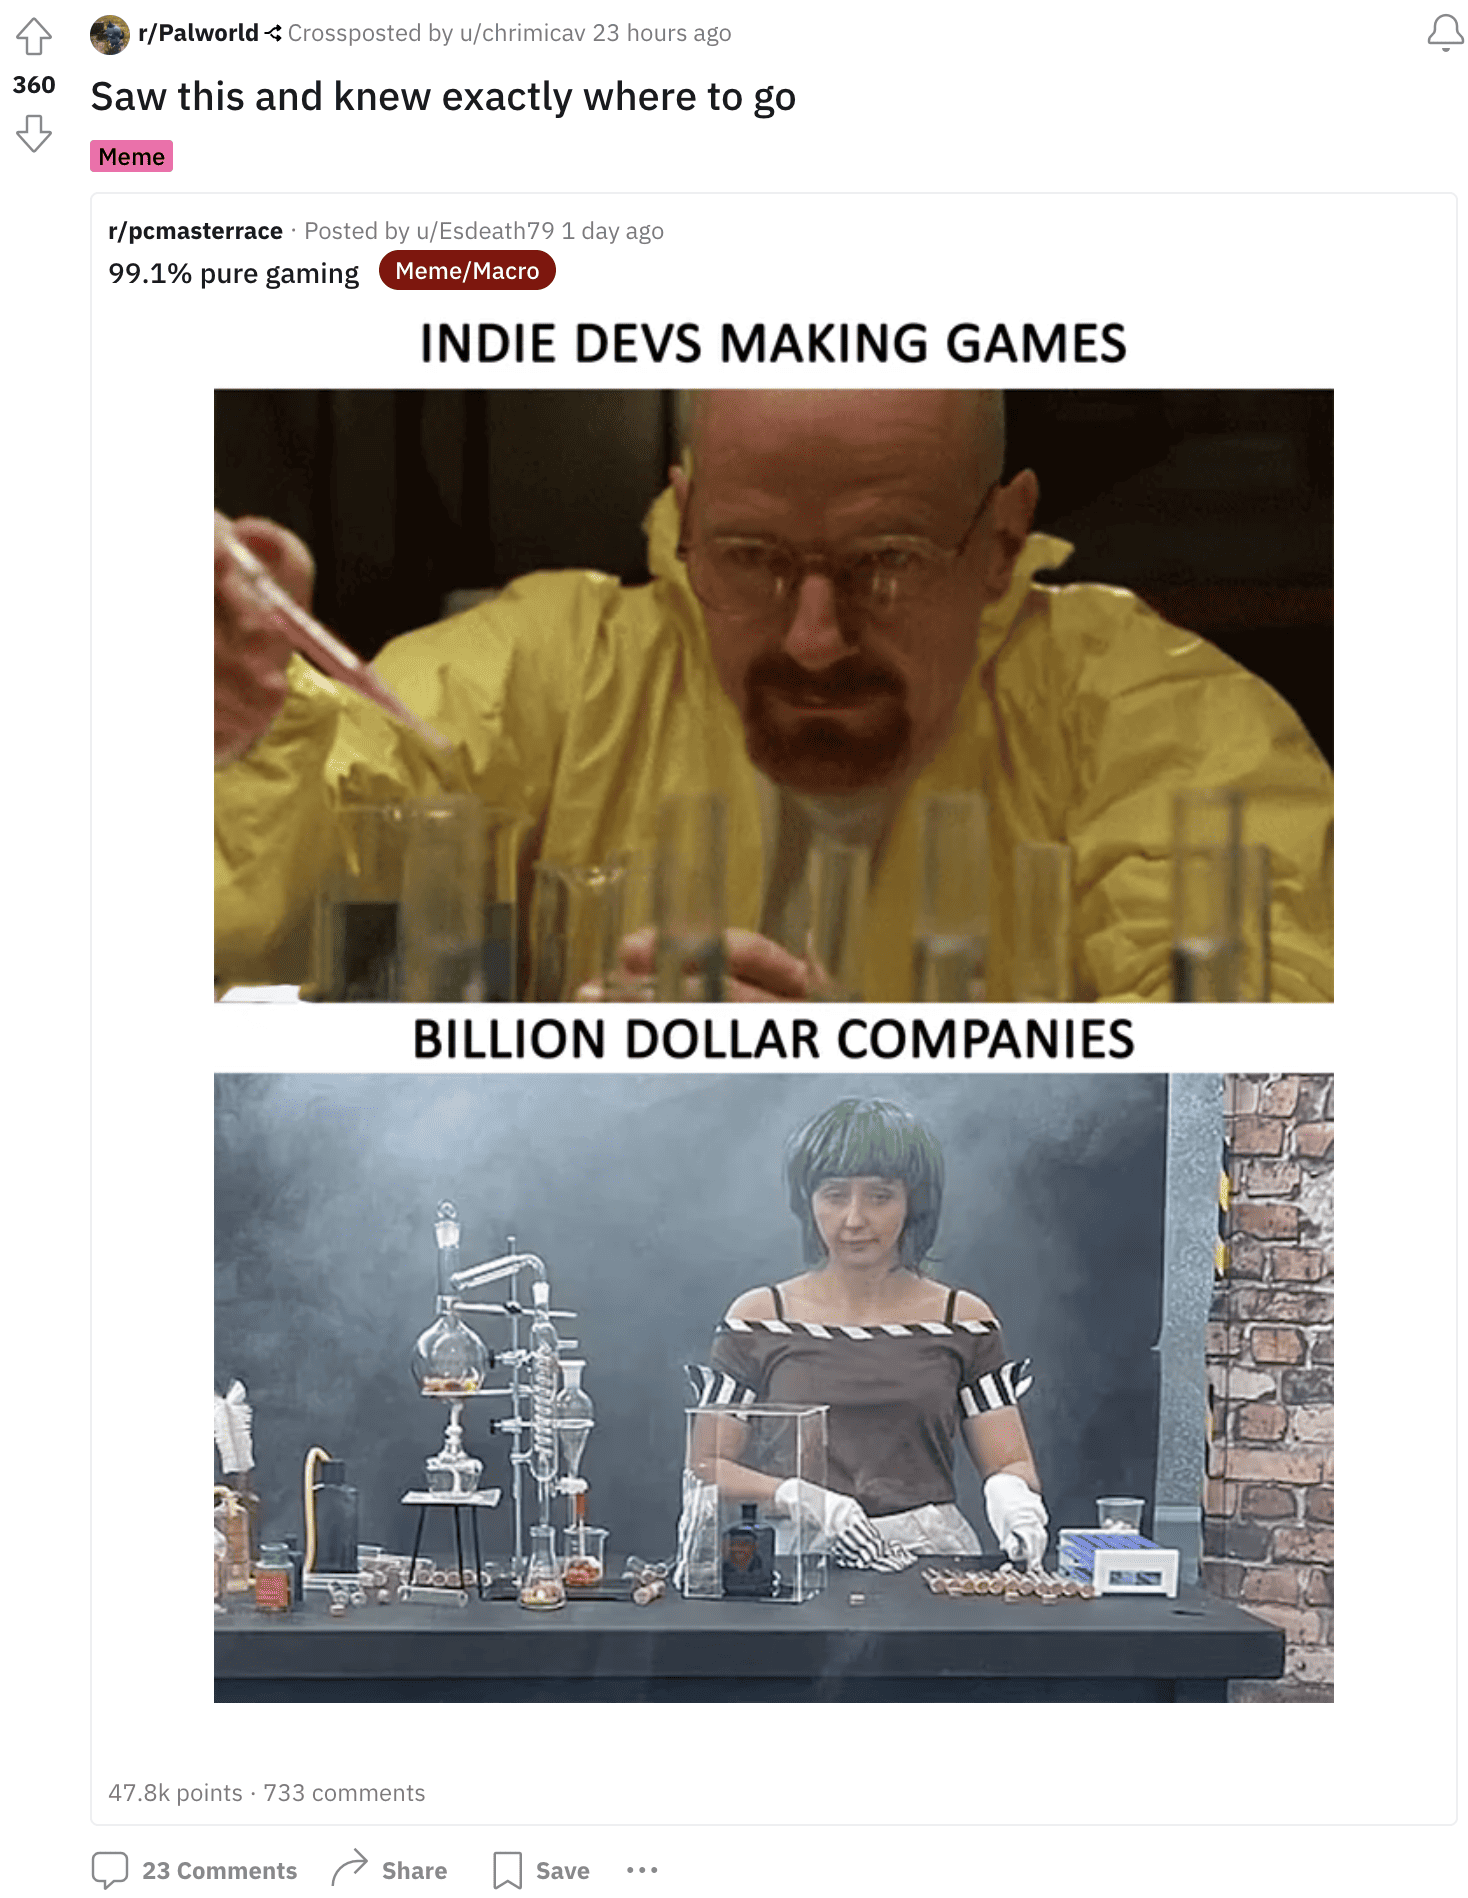 A tumblr featuring a man and a woman in a lab, where Palworld developers are praised over major studios.